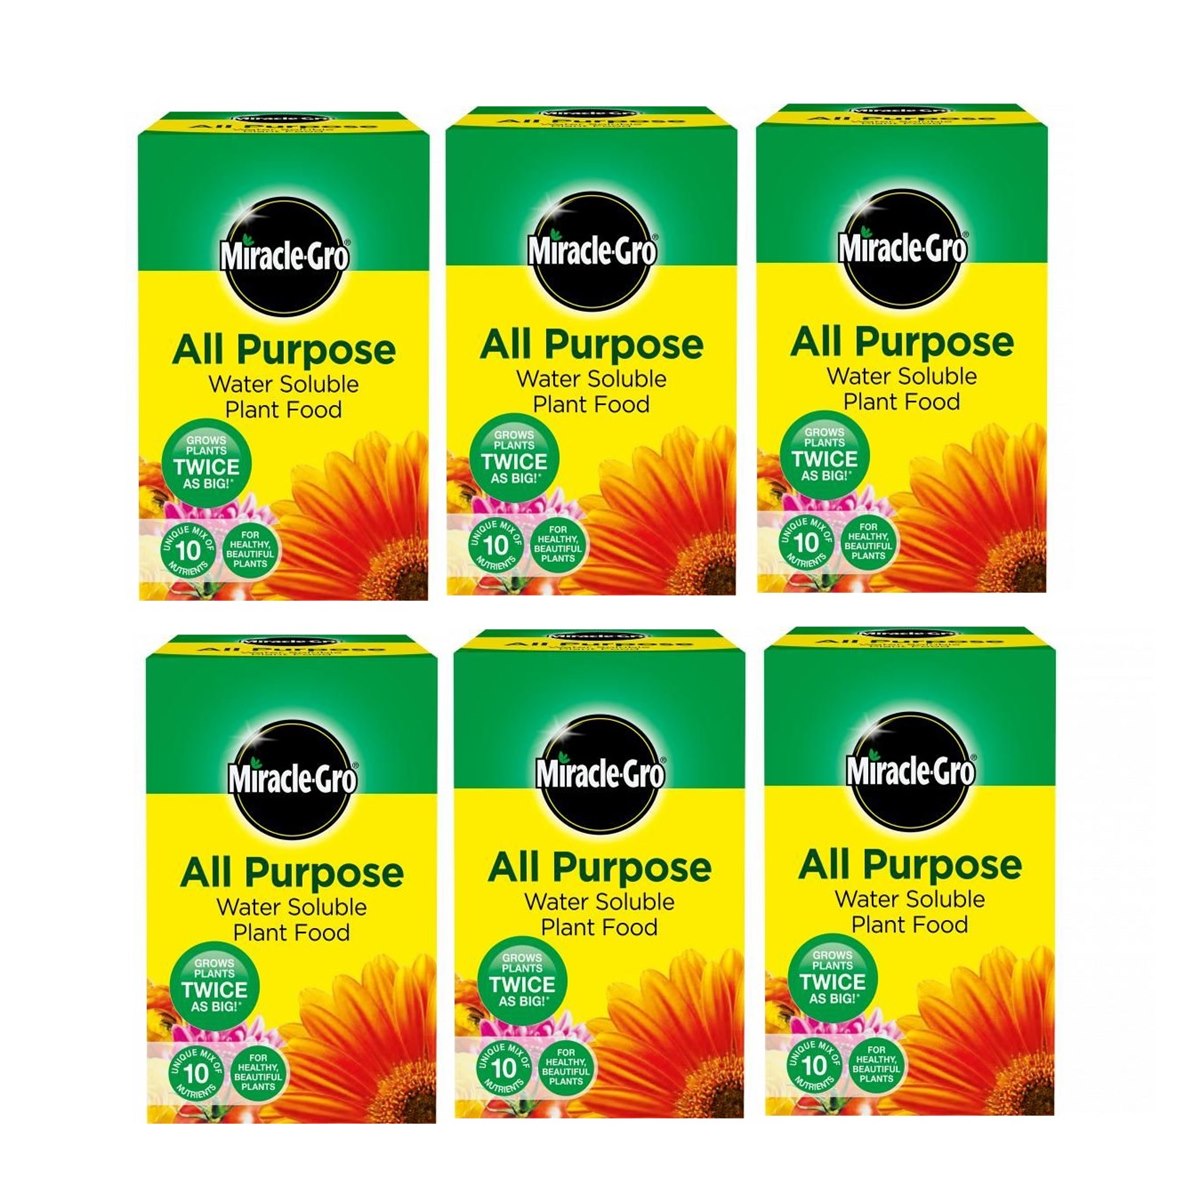 Case of 6 x Miracle Gro All Purpose Soluble Plant Food 500g